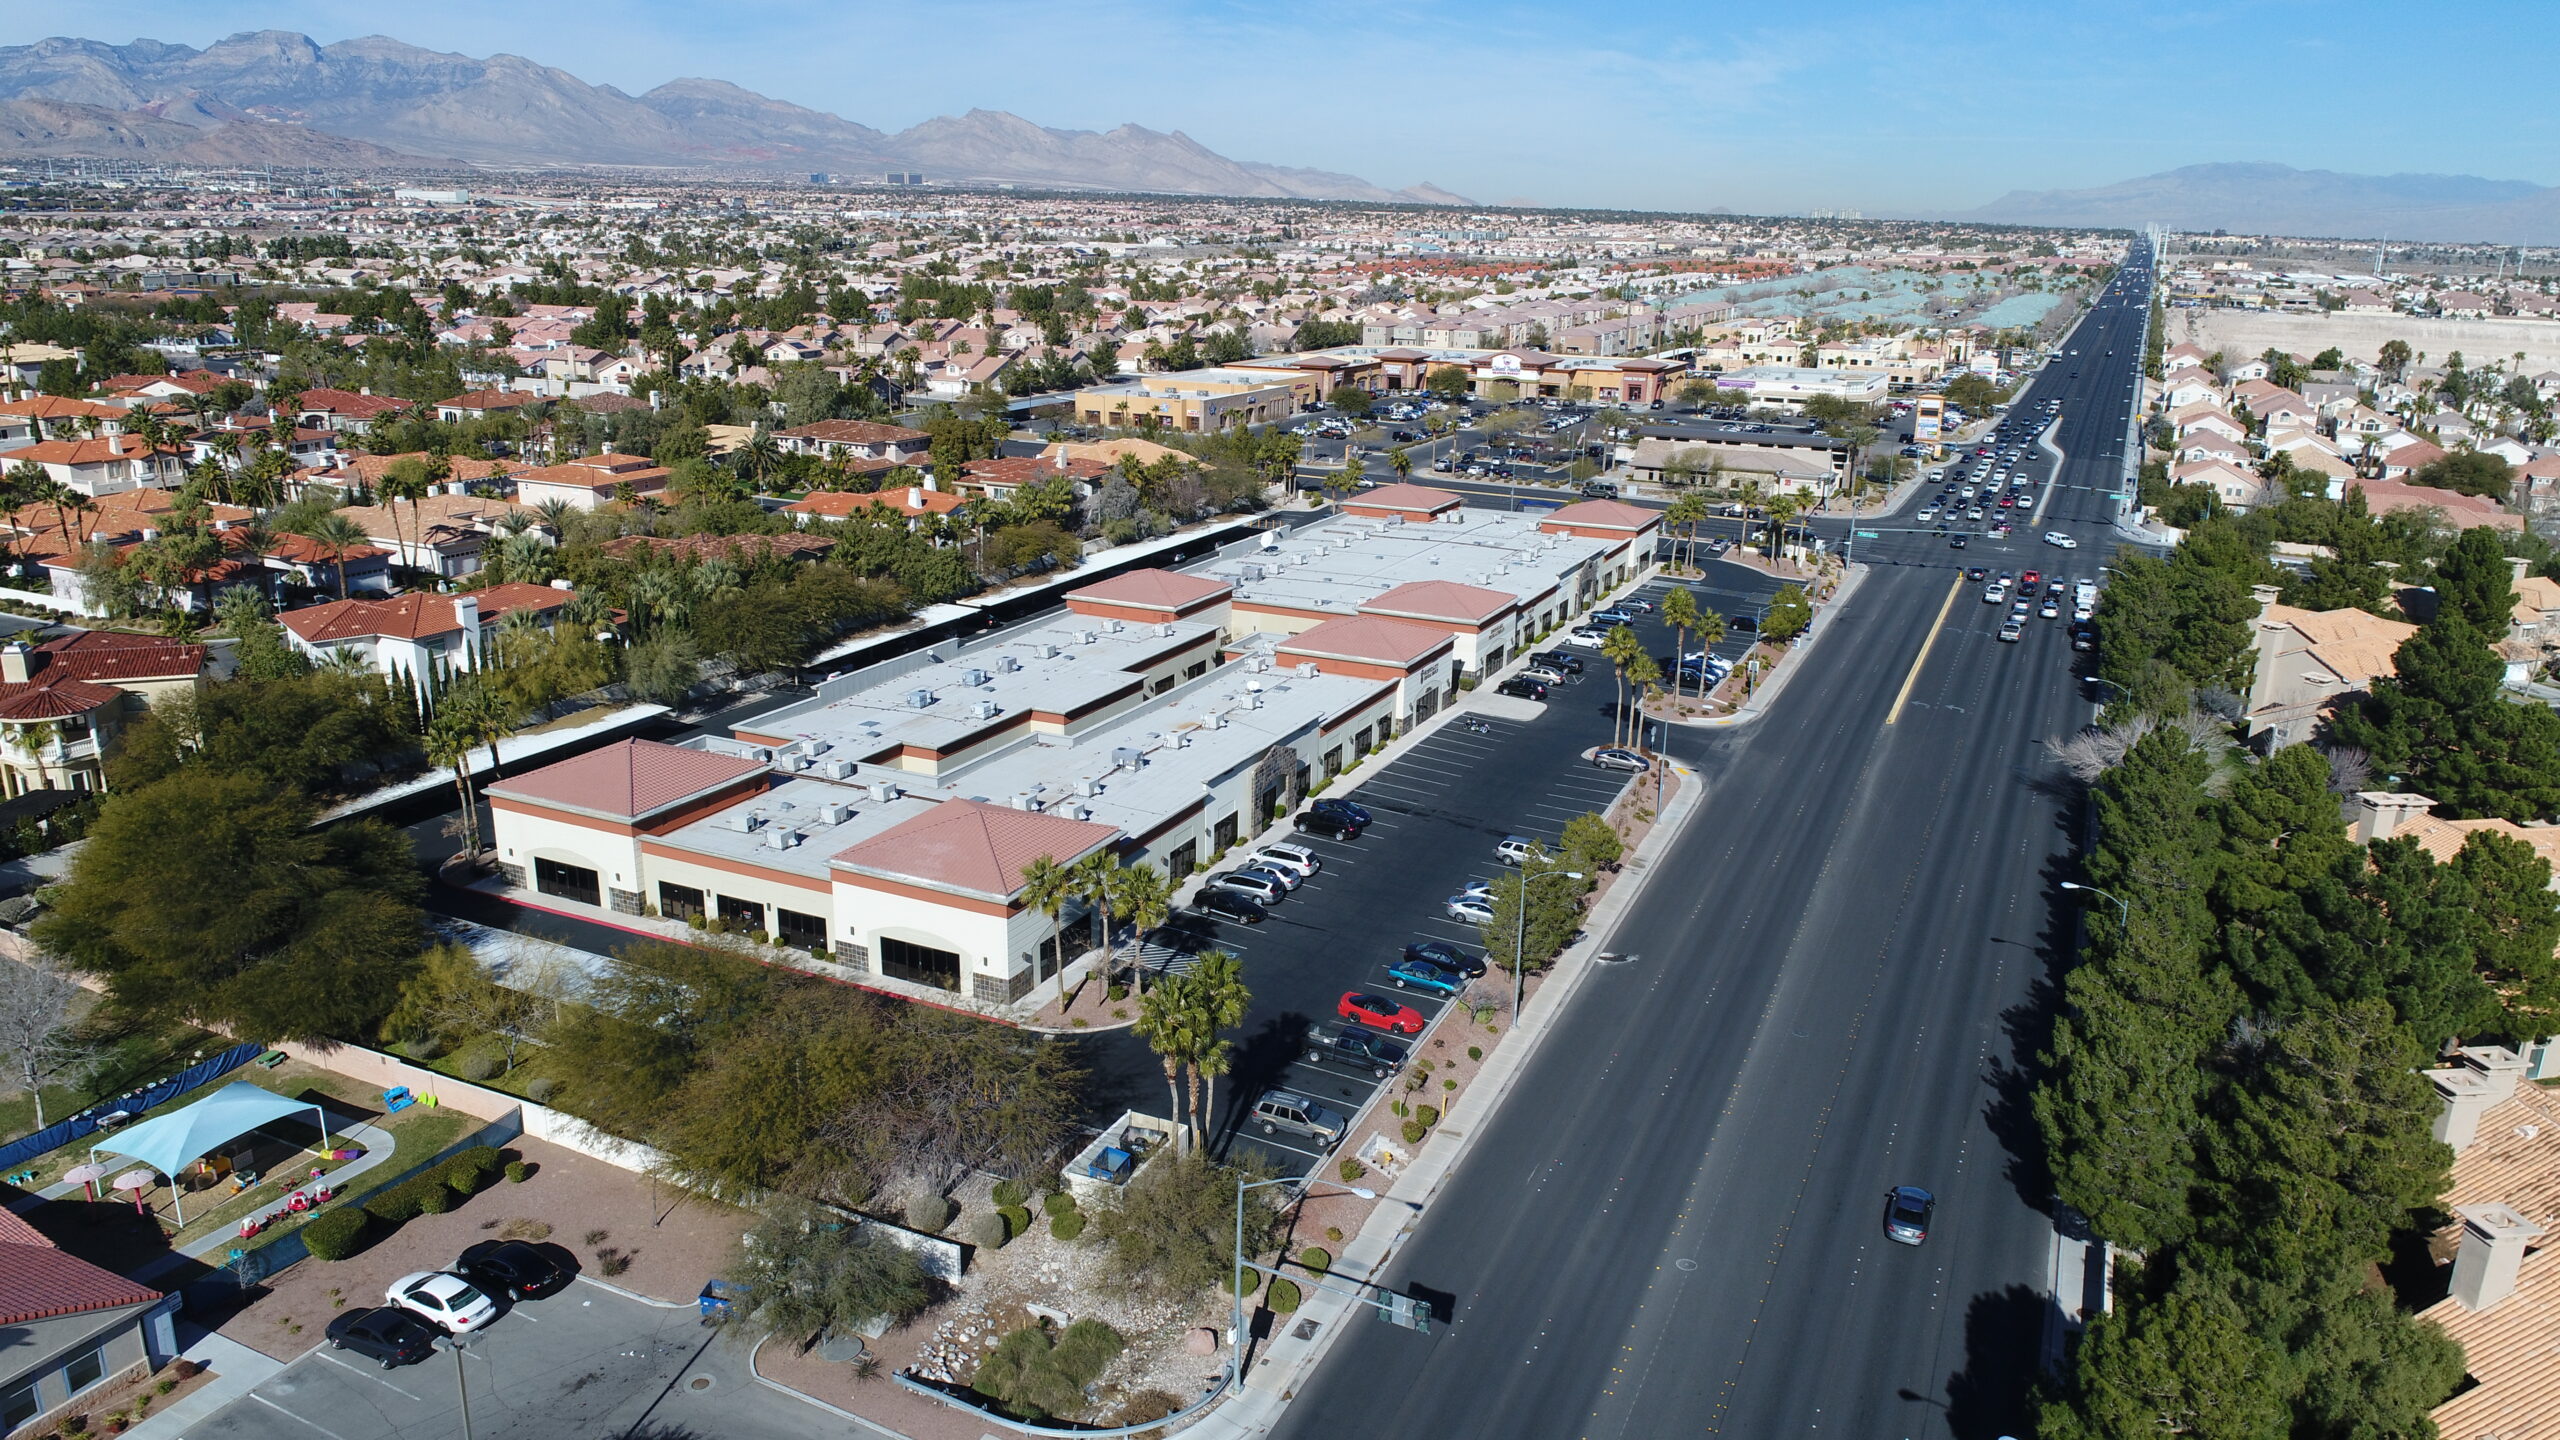 Drone shot of commercial building in Las Vegas, Nevada